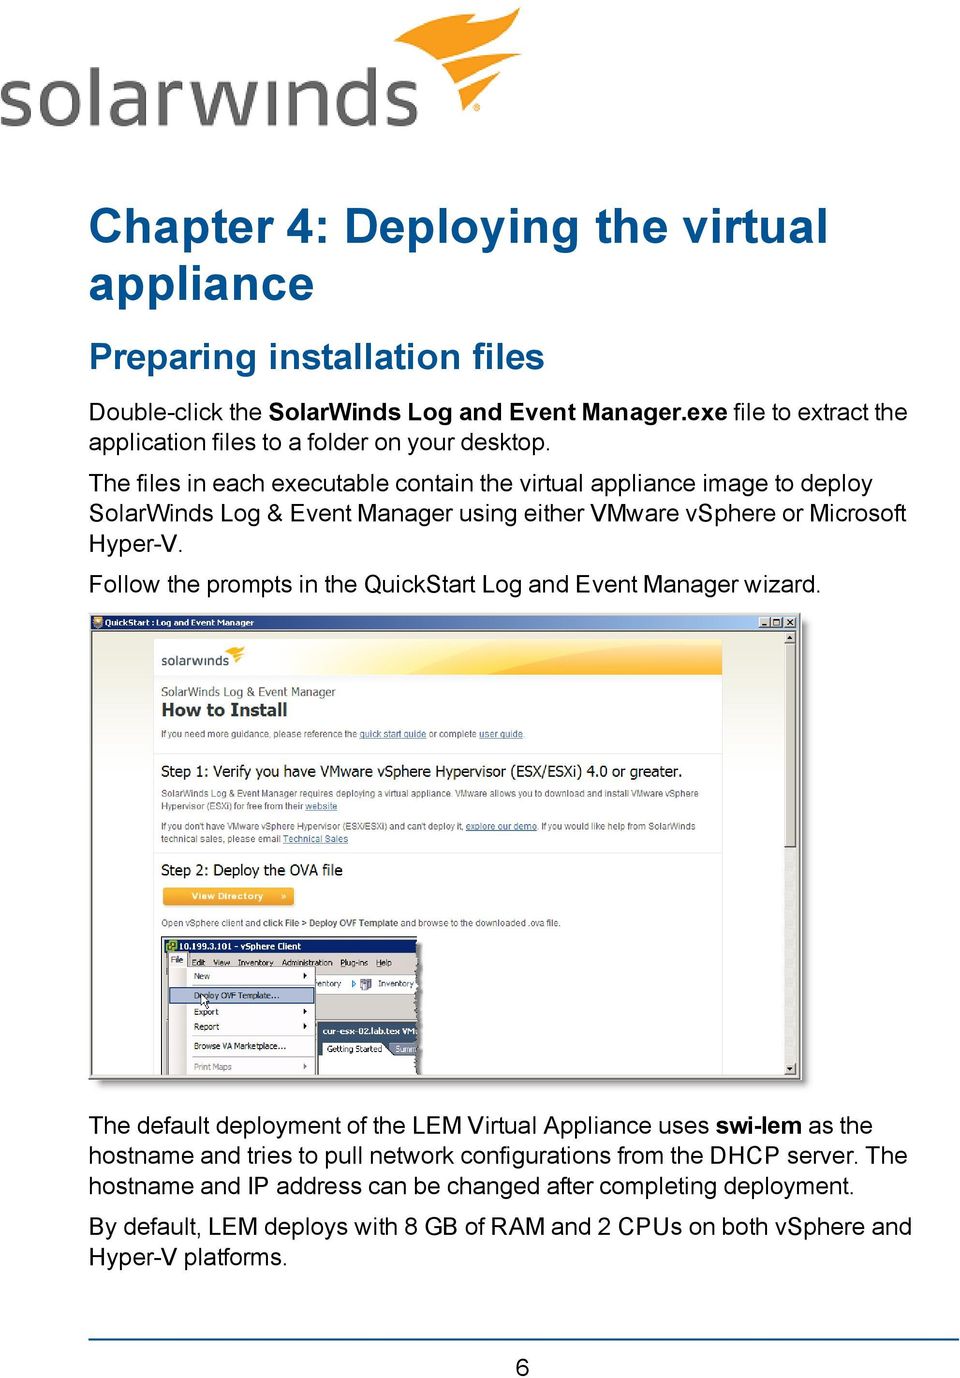 The files in each executable contain the virtual appliance image to deploy SolarWinds Log & Event Manager using either VMware vsphere or Microsoft Hyper-V.